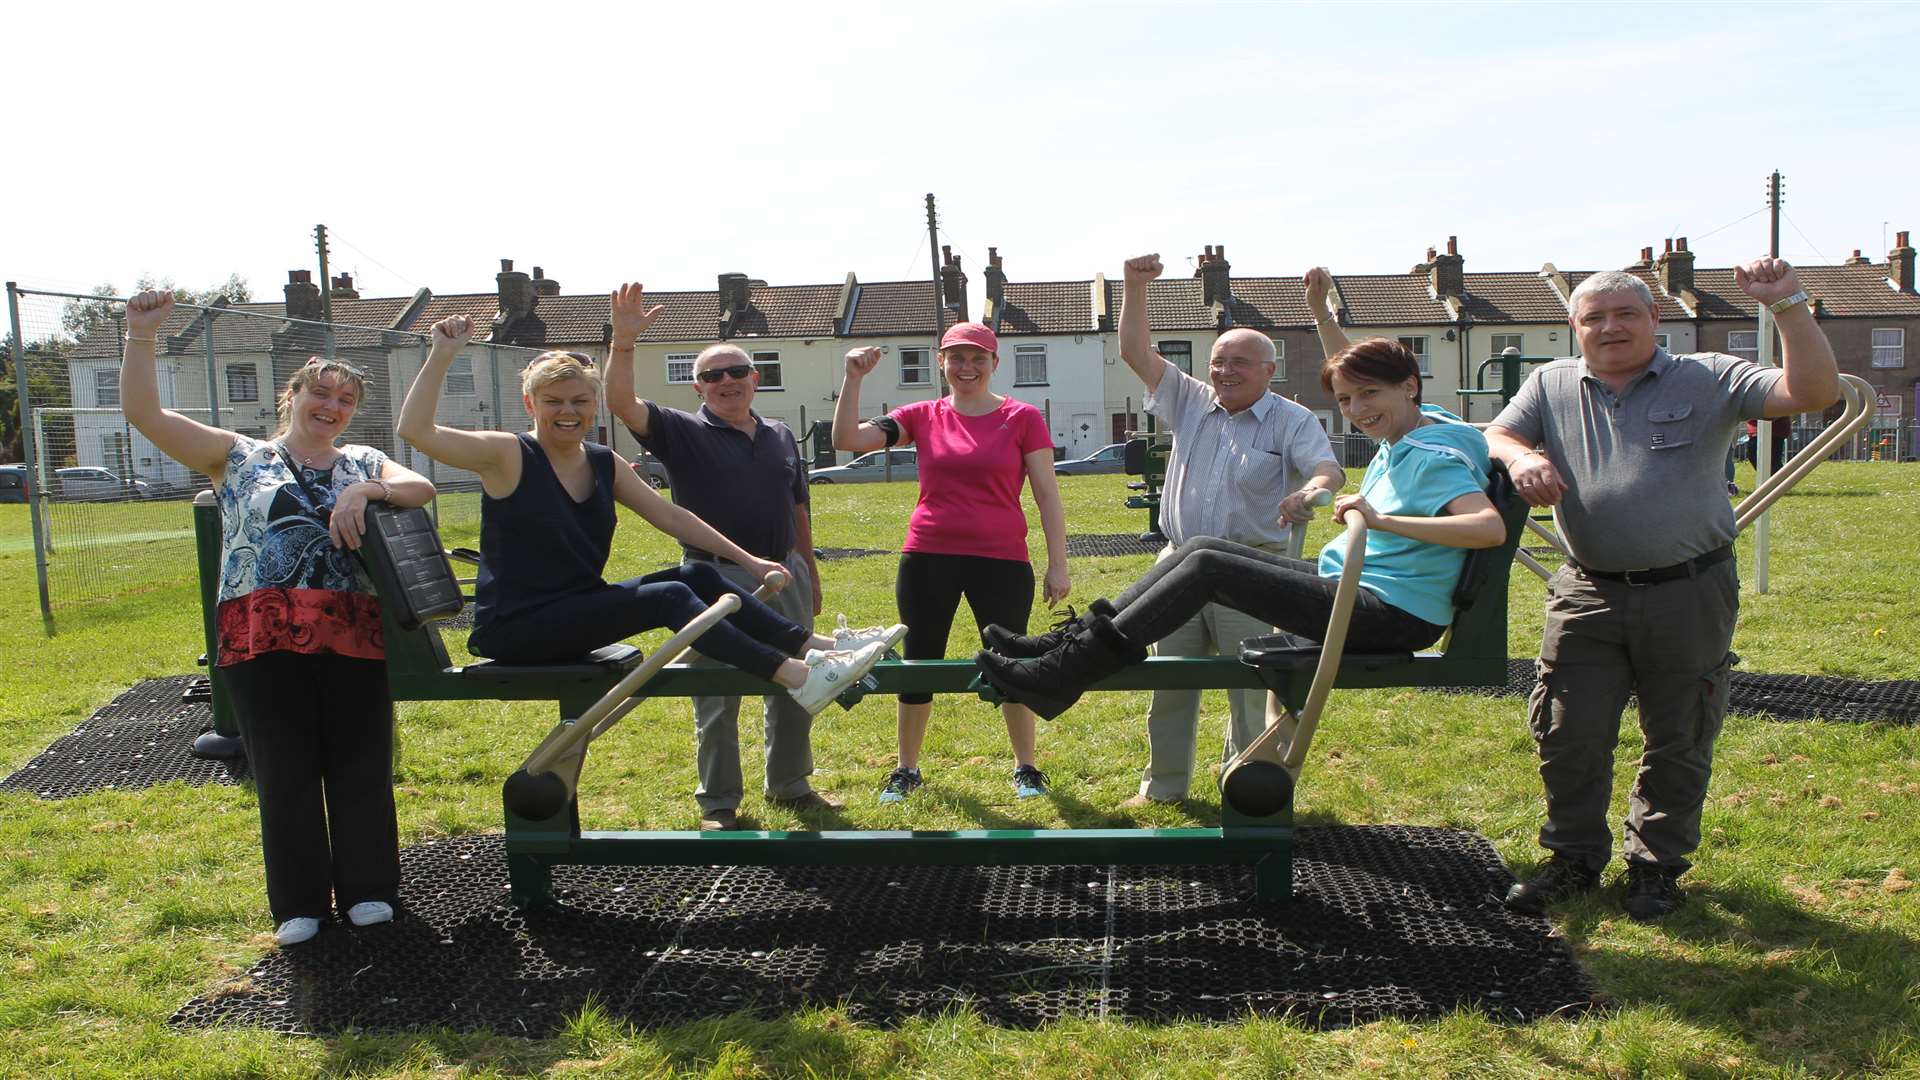 From left, Tracey Williams, resident, Carolyn Drayson, resident, Keith Impiazzi, parish councillor, Evie Ashley, resident, Dave Hammock, Borough Councillor, Anna Munday, parish councillor and Keith Burgin, parish councillor, with new park equipment in Bean Park.